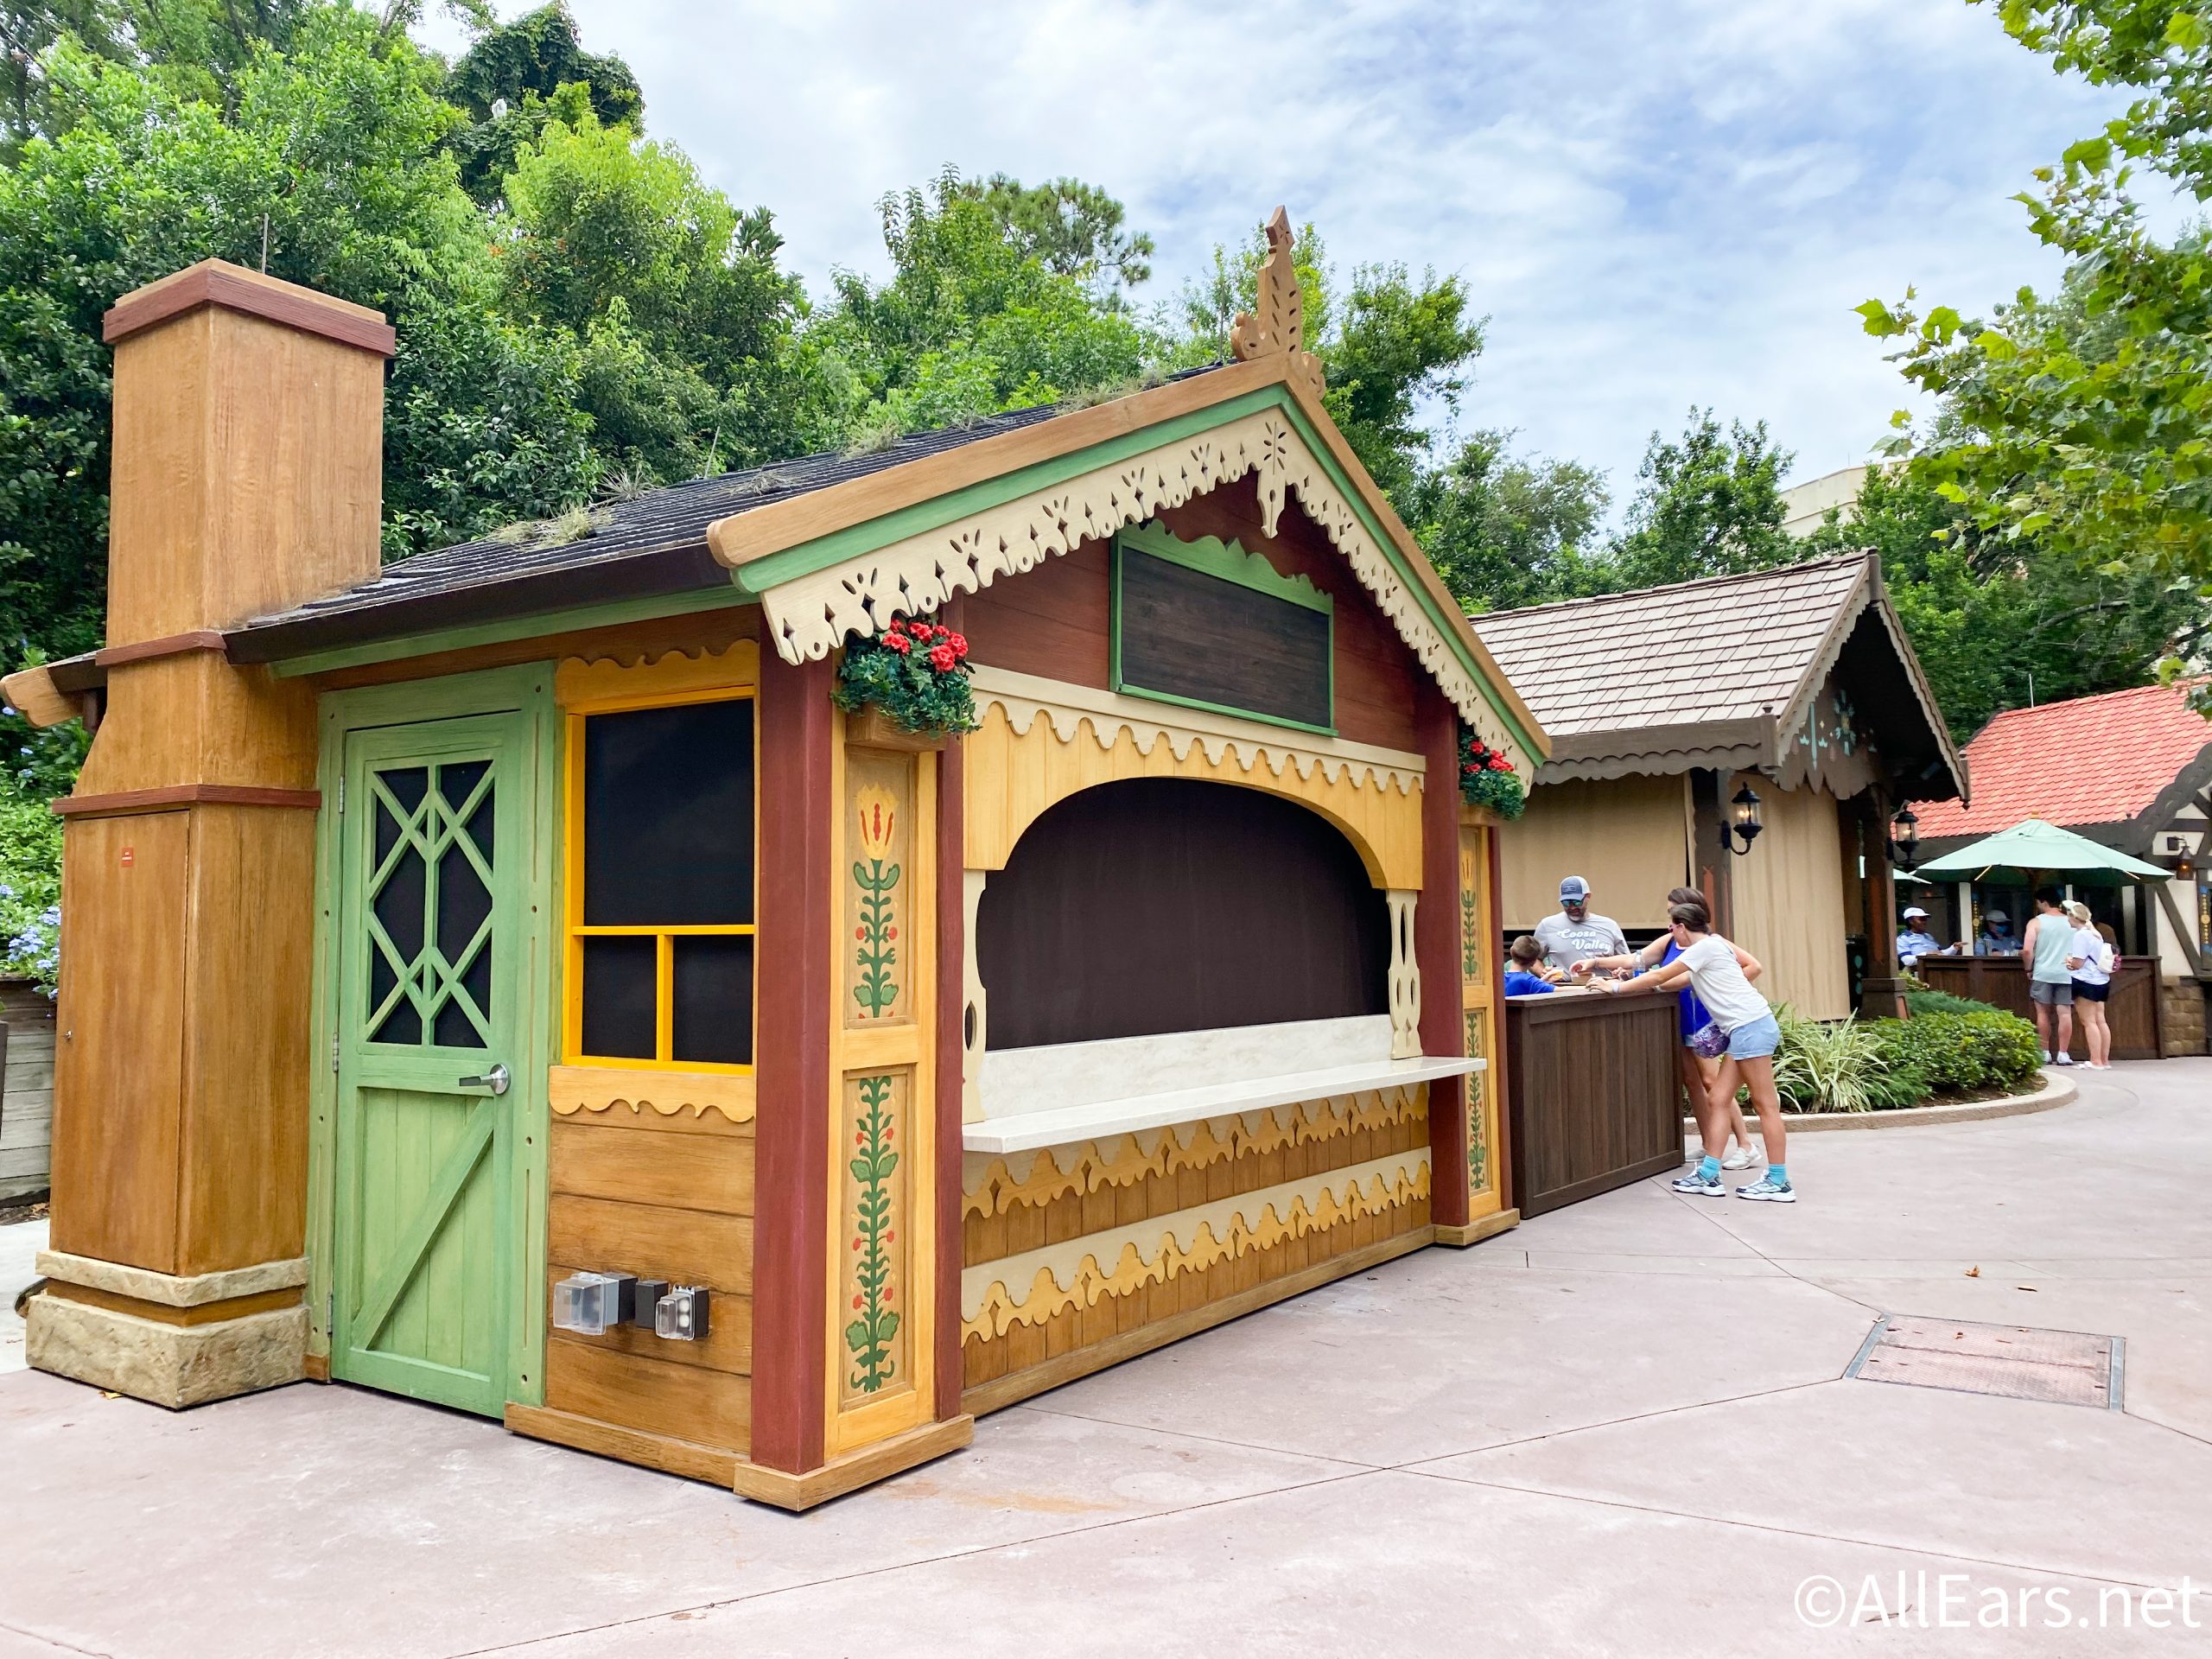 PHOTOS: More Food & Wine Festival Booths Arrive in EPCOT! - AllEars.Net